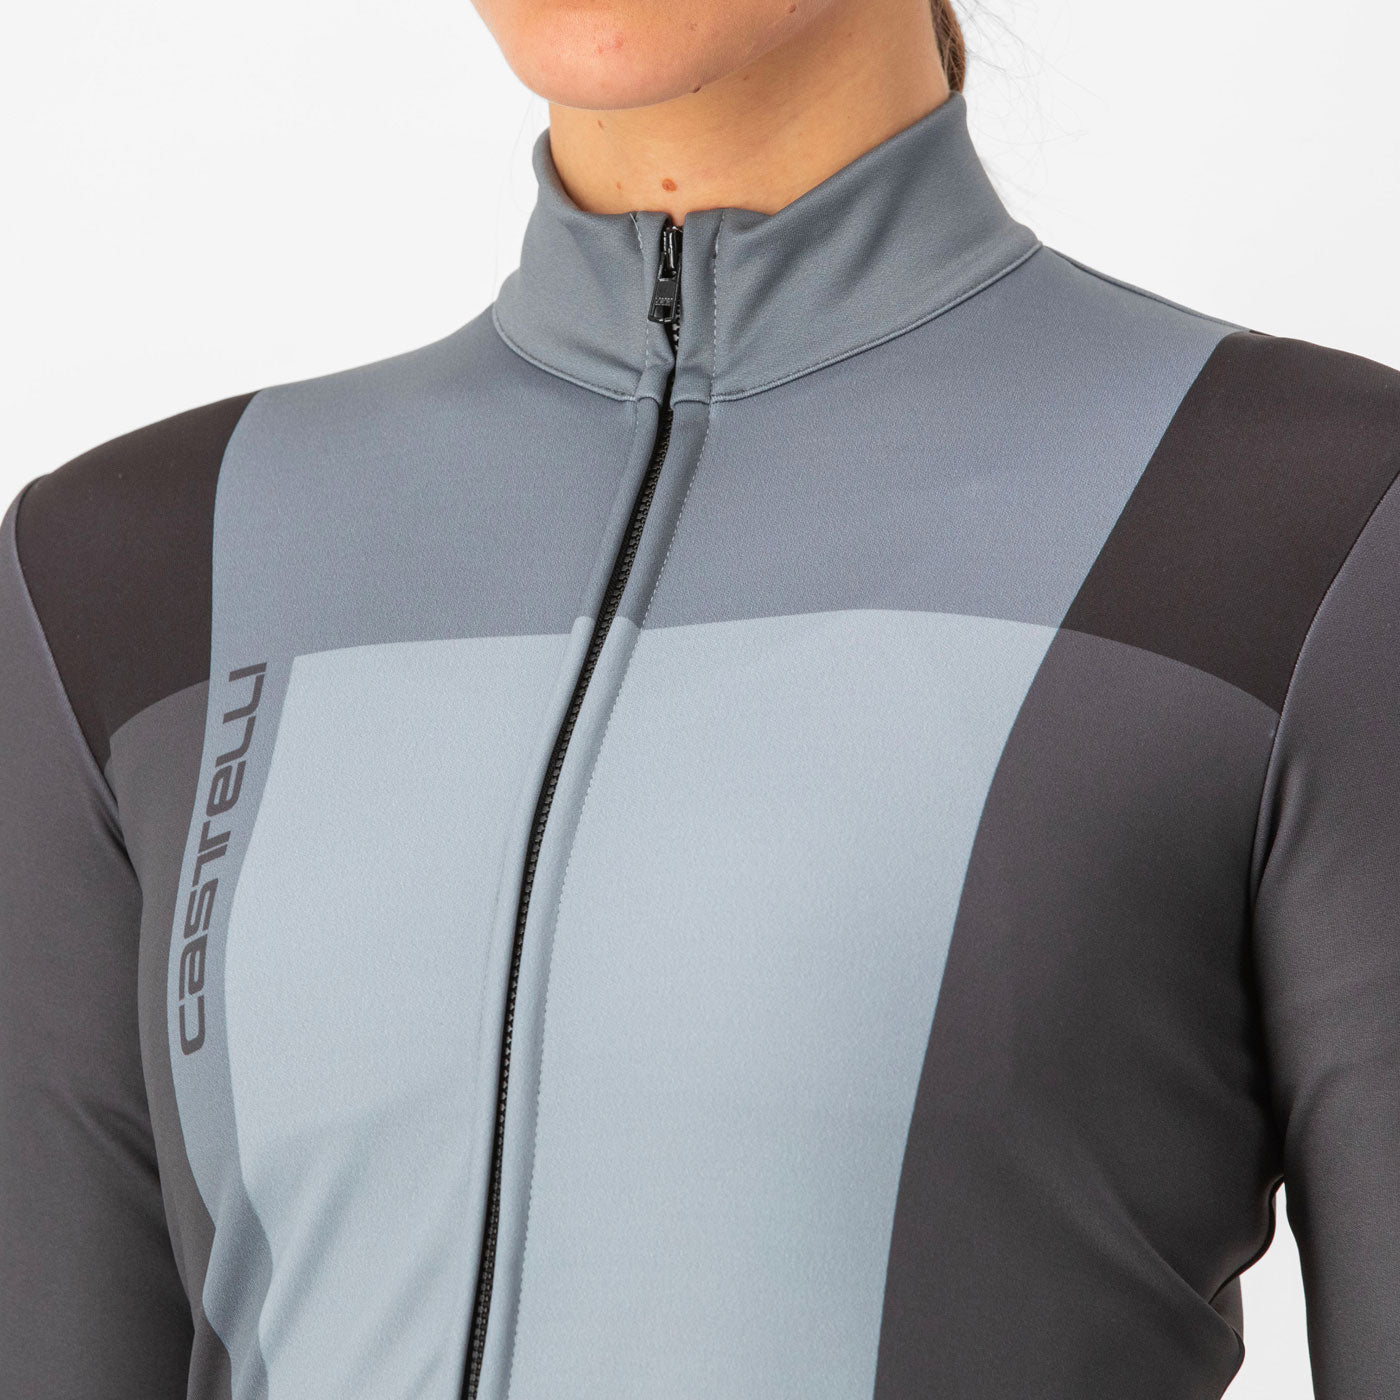 Castelli Unlimited Thermal women long sleeved jersey - Black gray